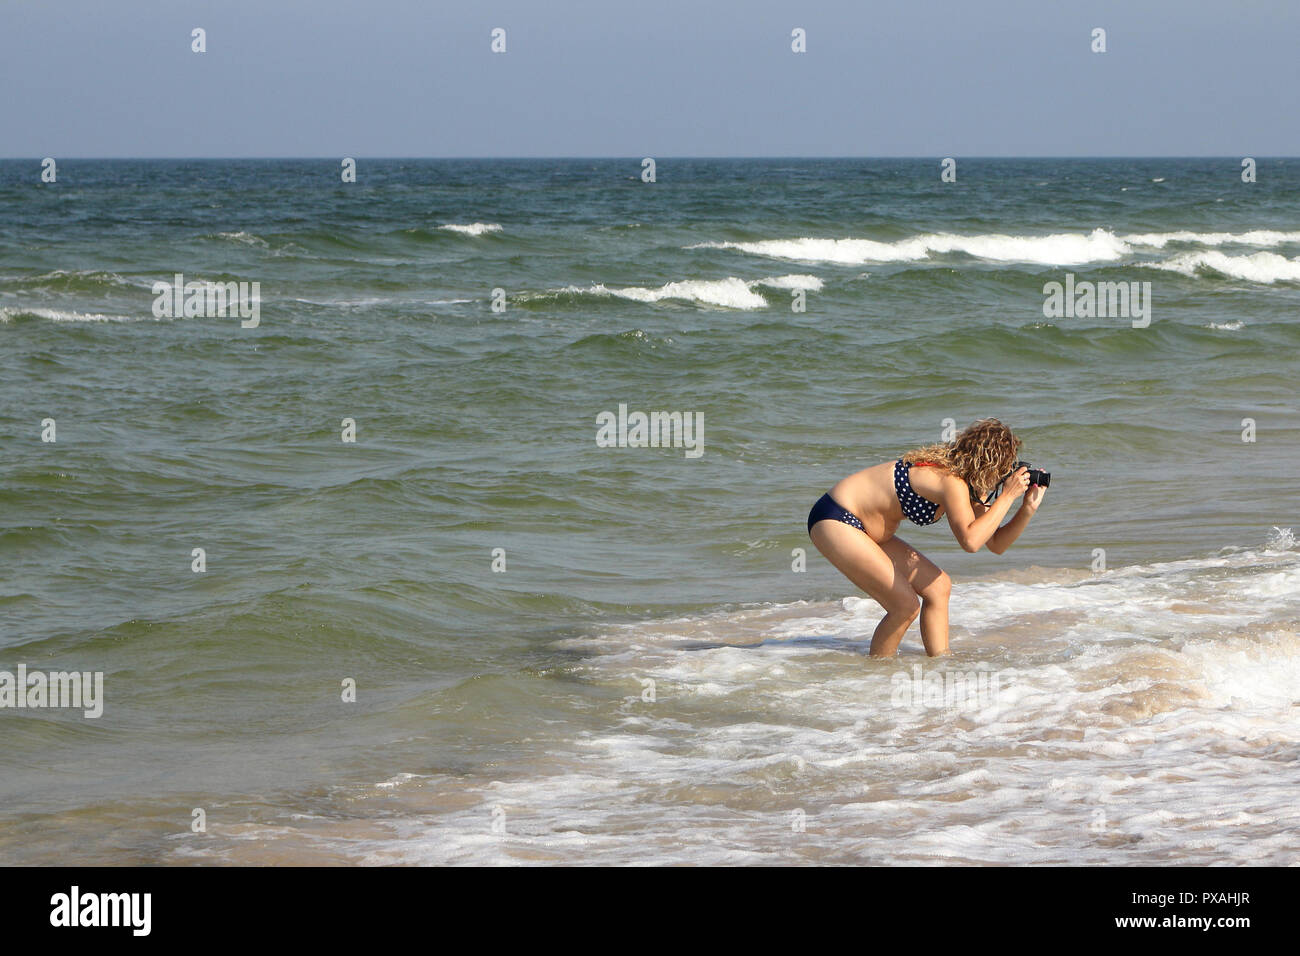 A woman stands in shallow water of the Baltic sea and takes a photograph. Stock Photo